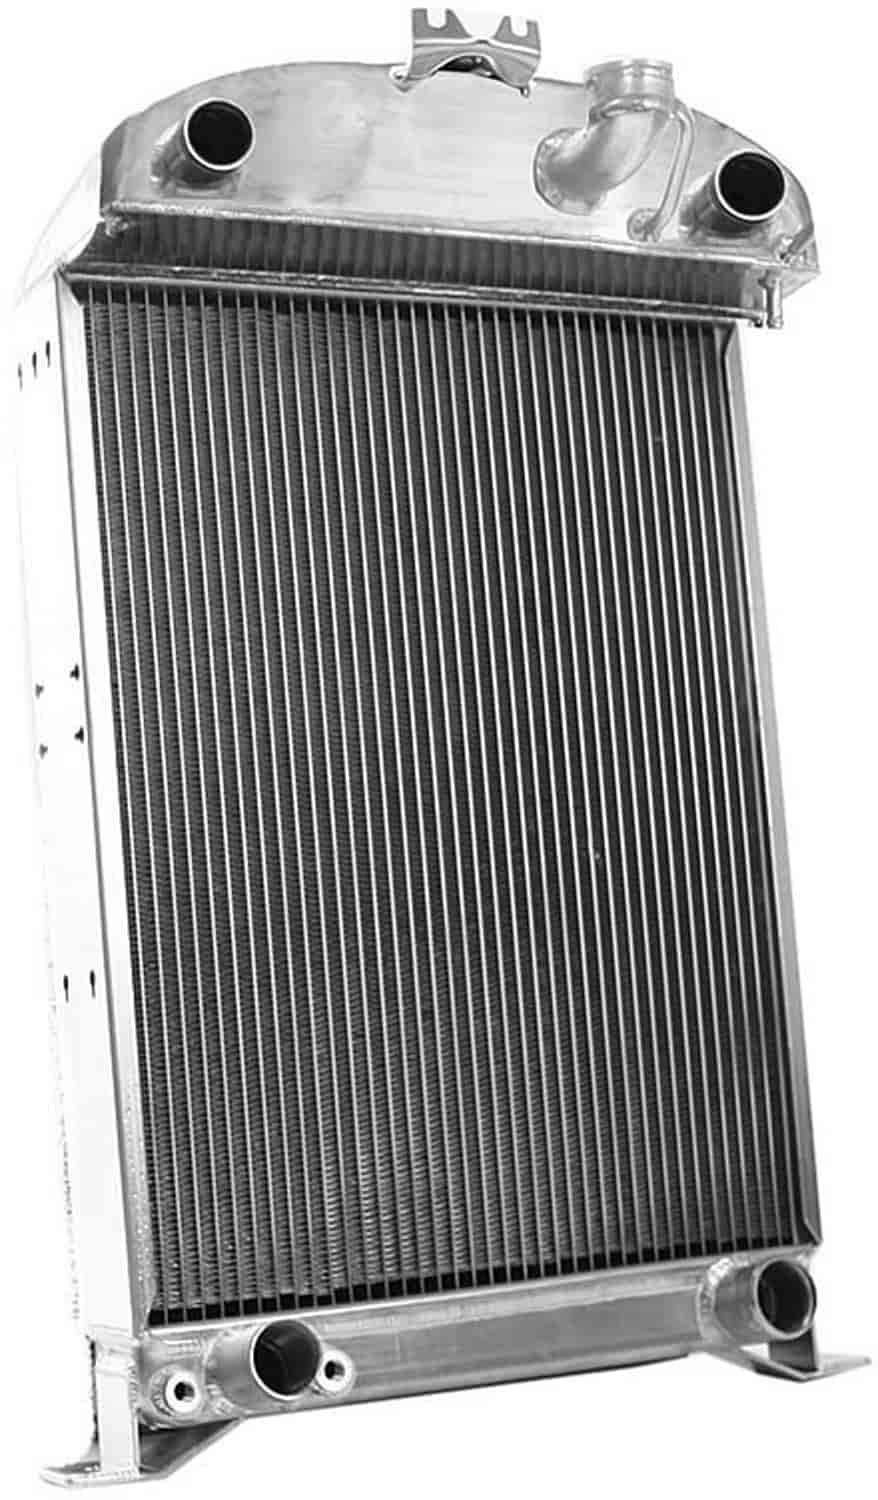 ExactFit Radiator for 1933-1934 Ford with Early Ford Flathead V8